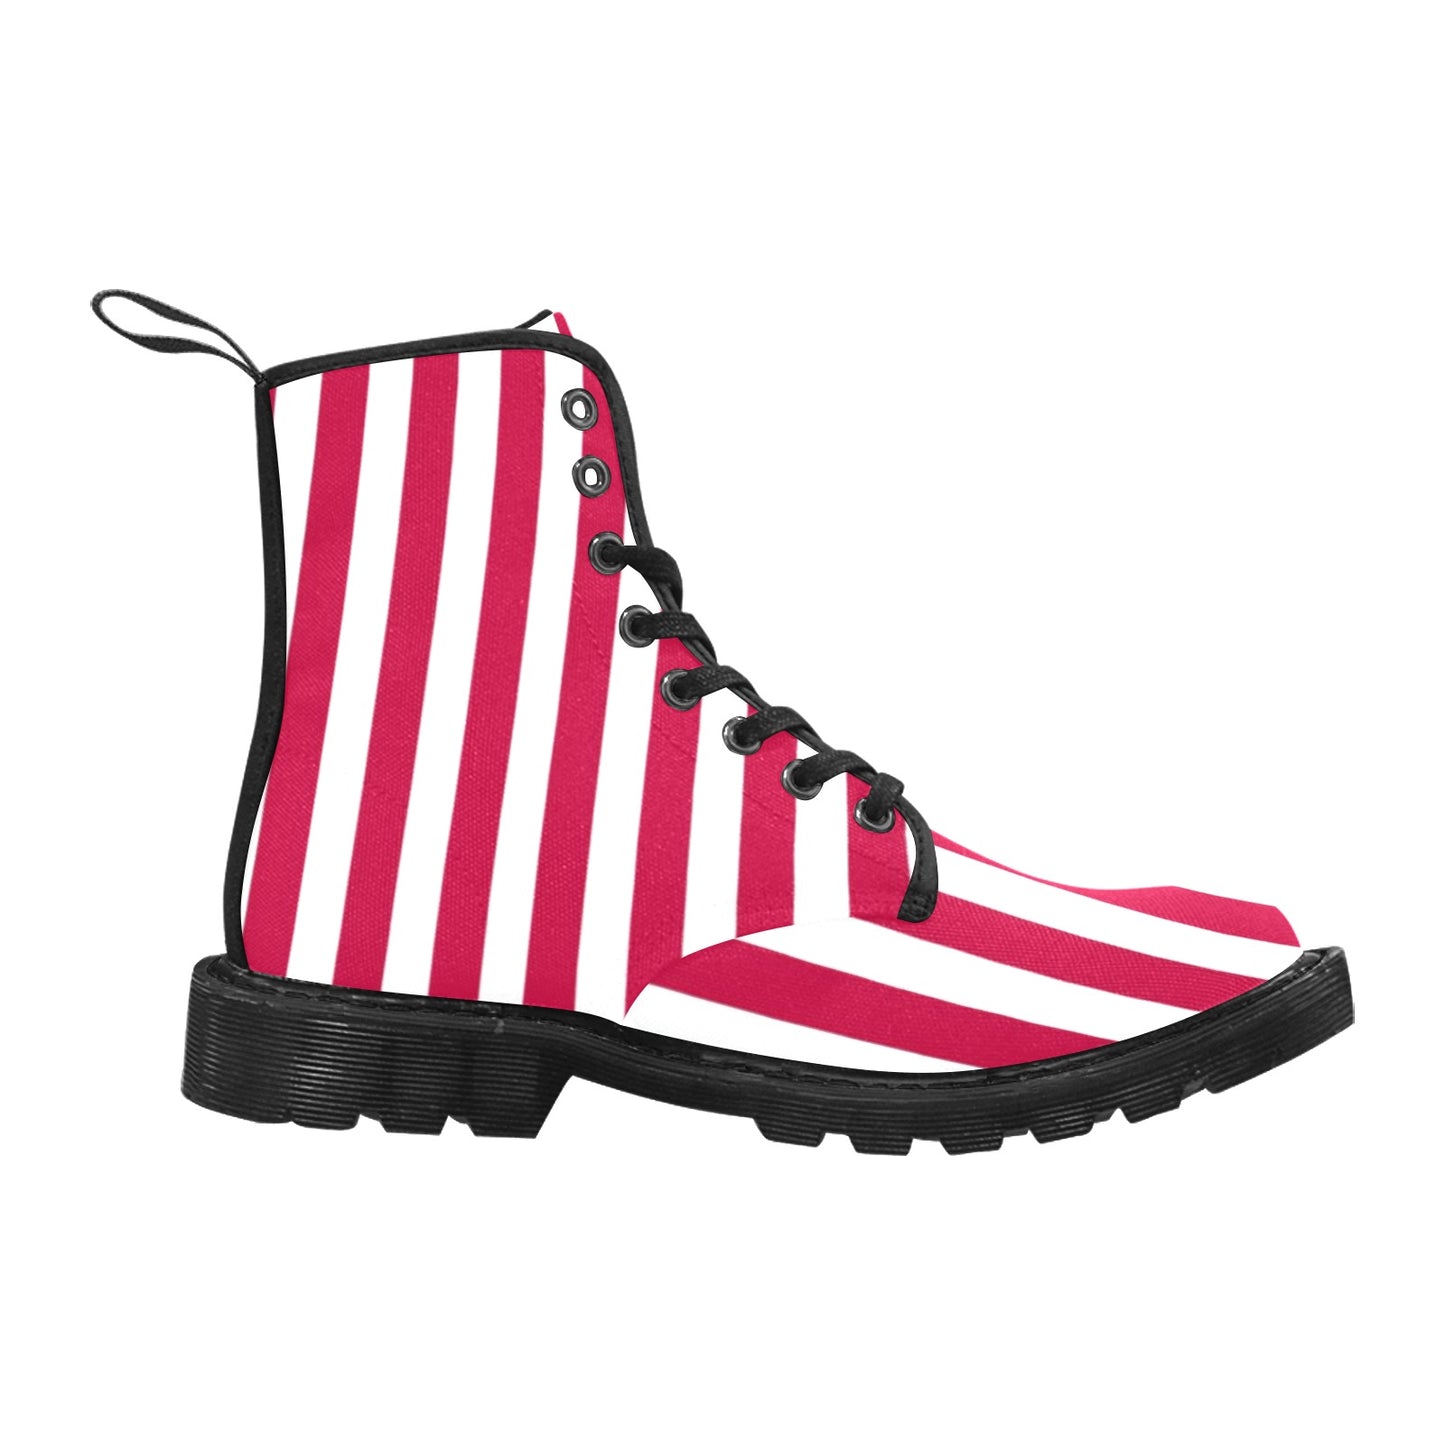 Candy Cane - Men's Ollie Boots